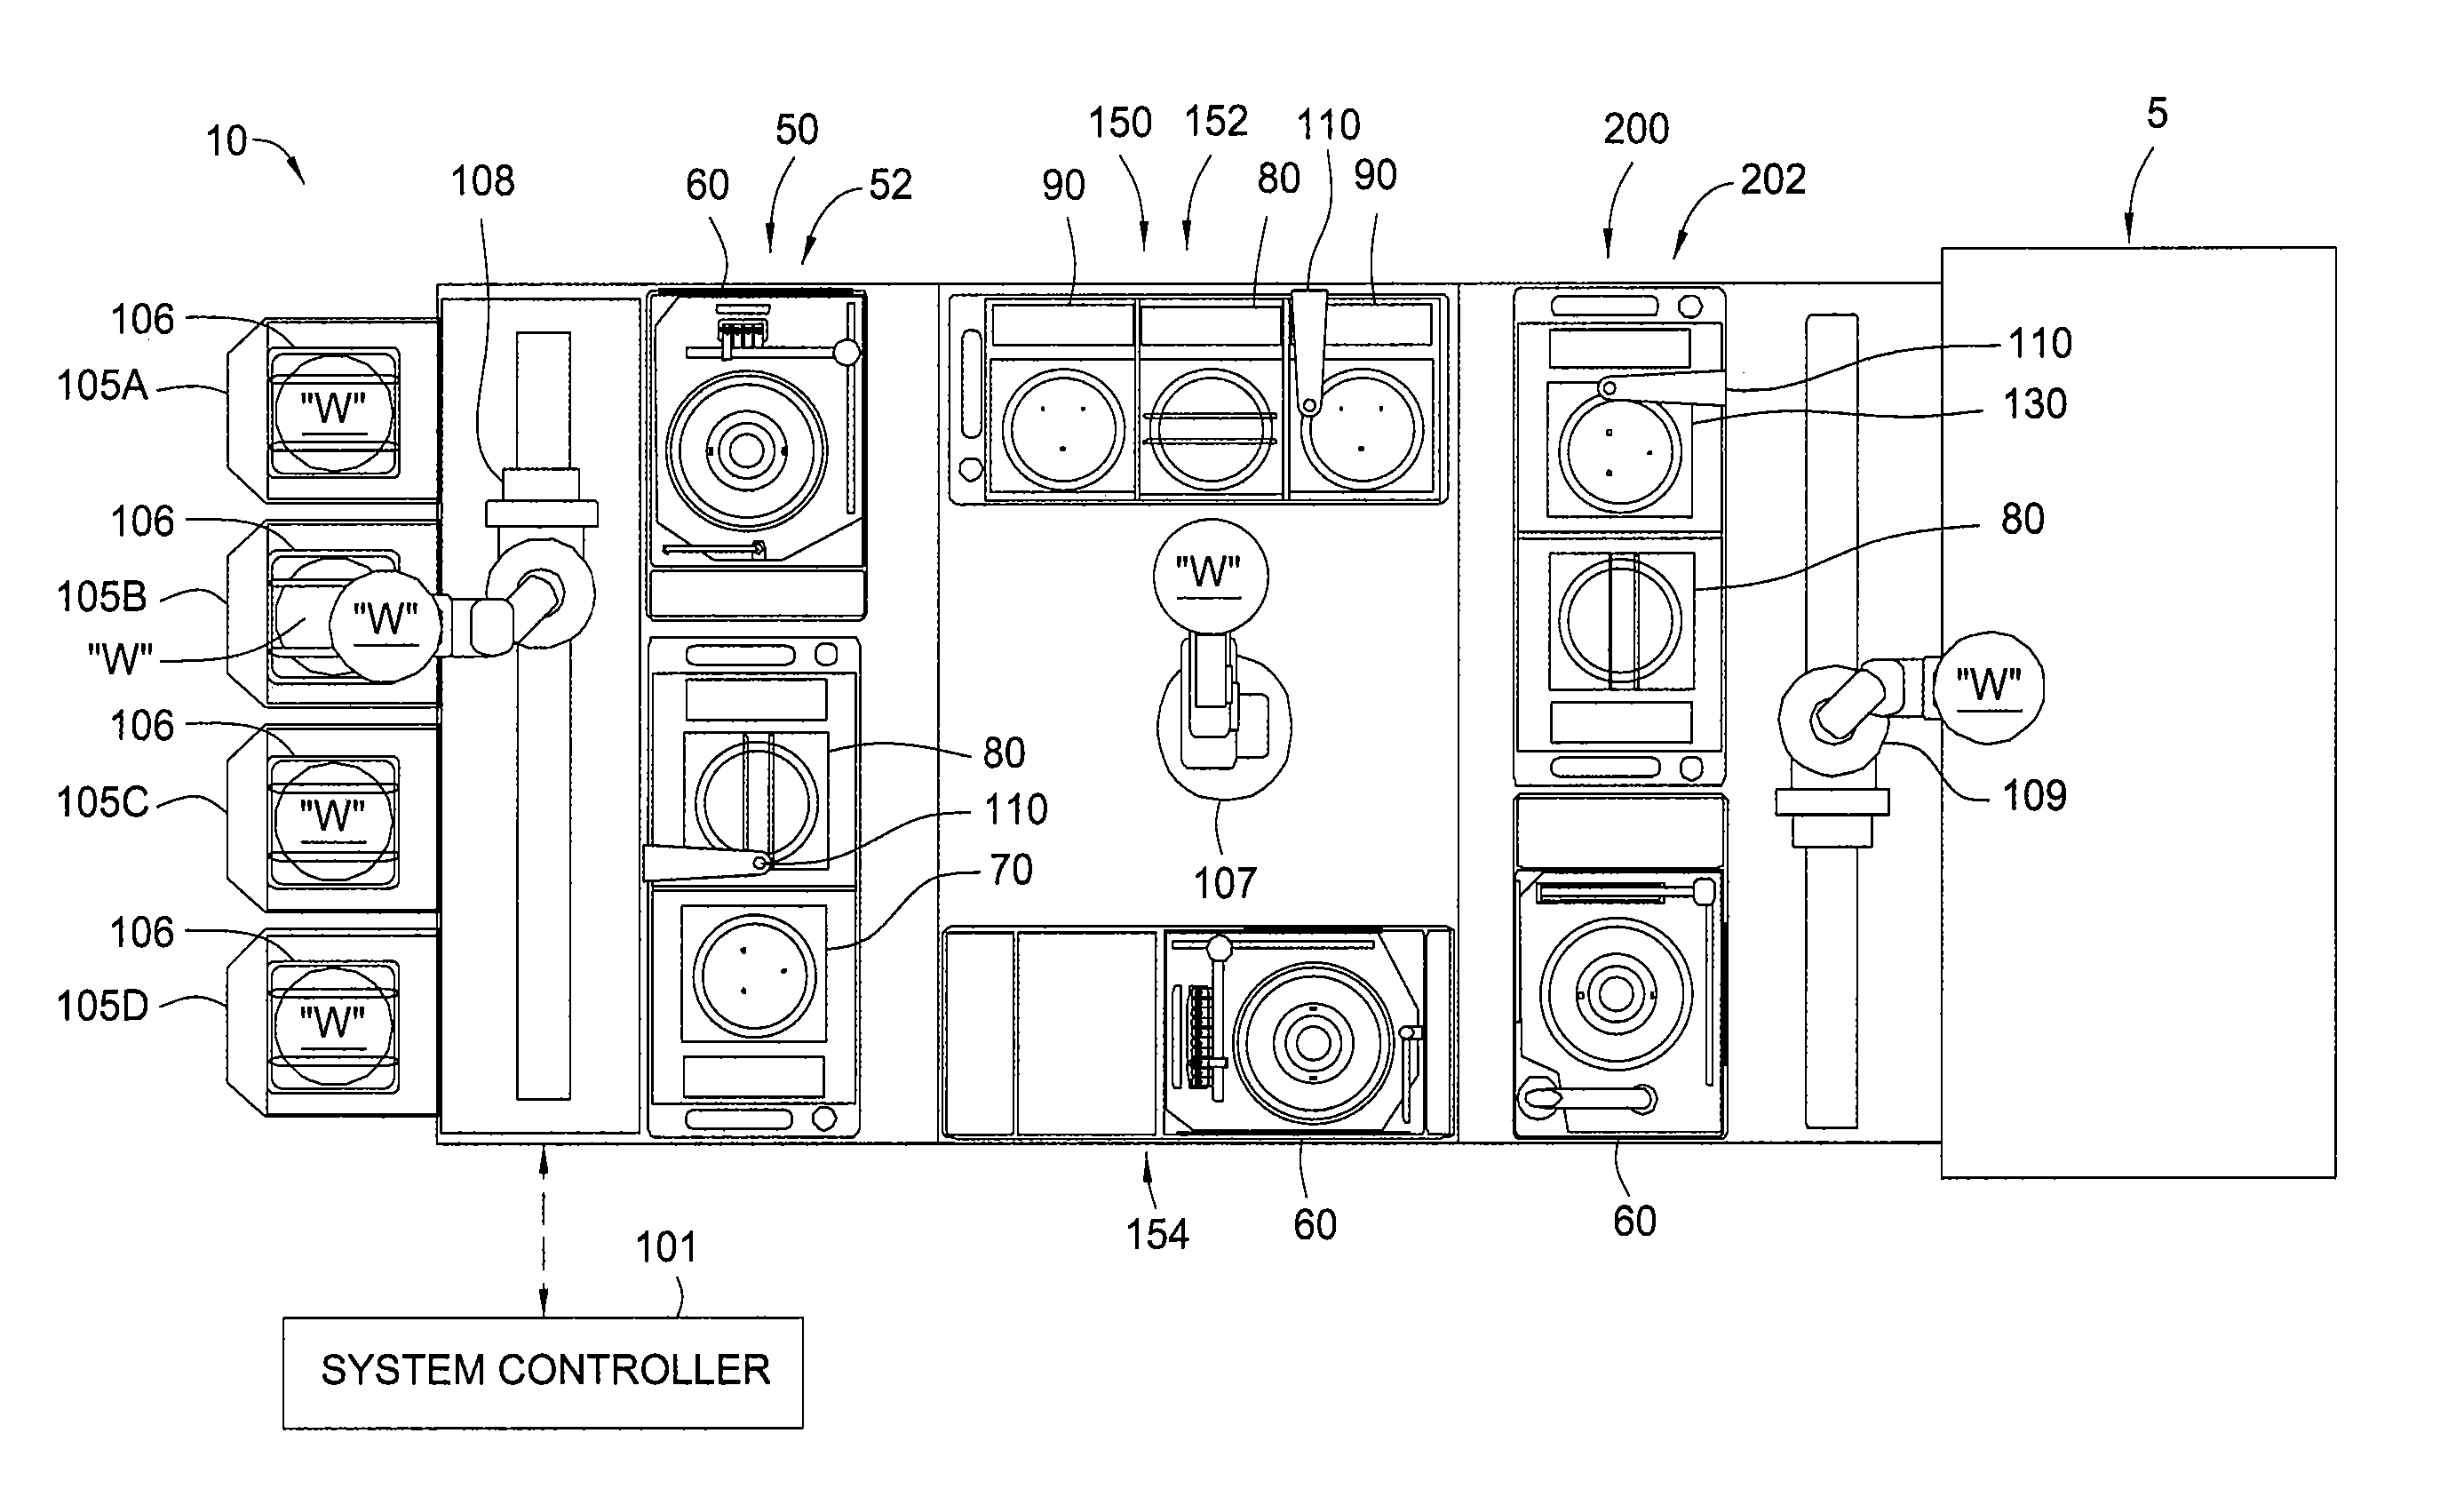 Cluster tool architecture for processing a substrate